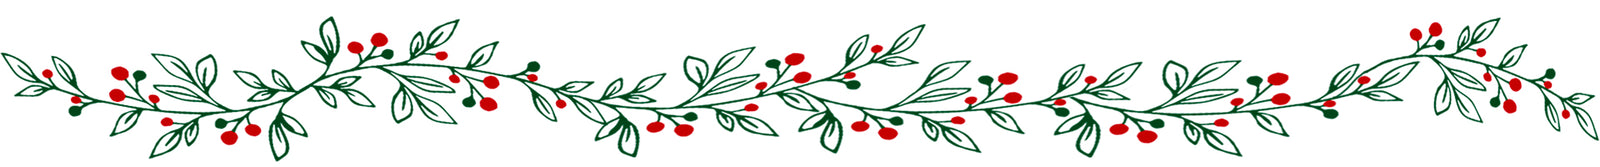 Decorative holly graphic image with holly and berries.